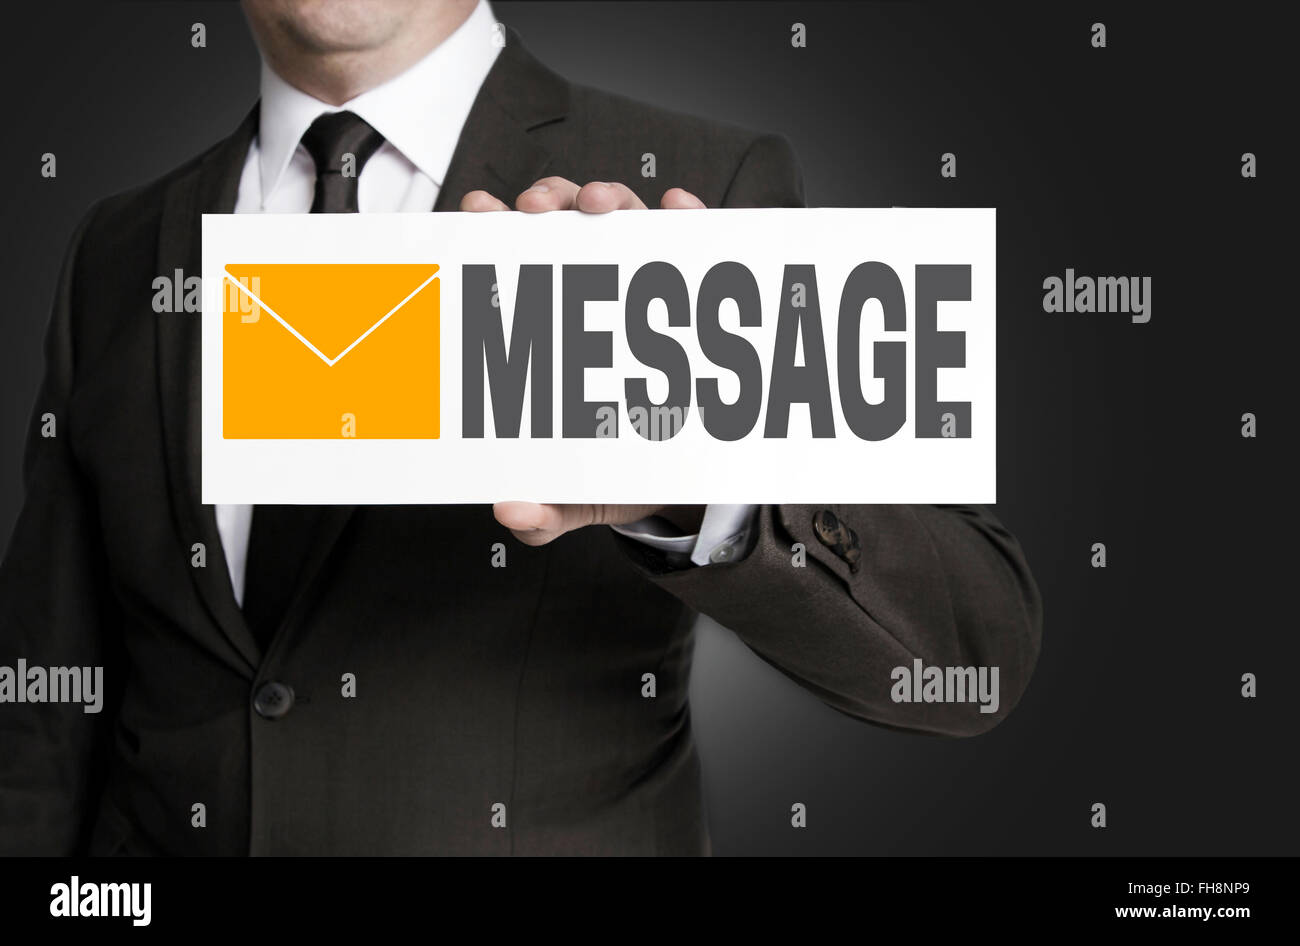 message sign is held by businessman. Stock Photo